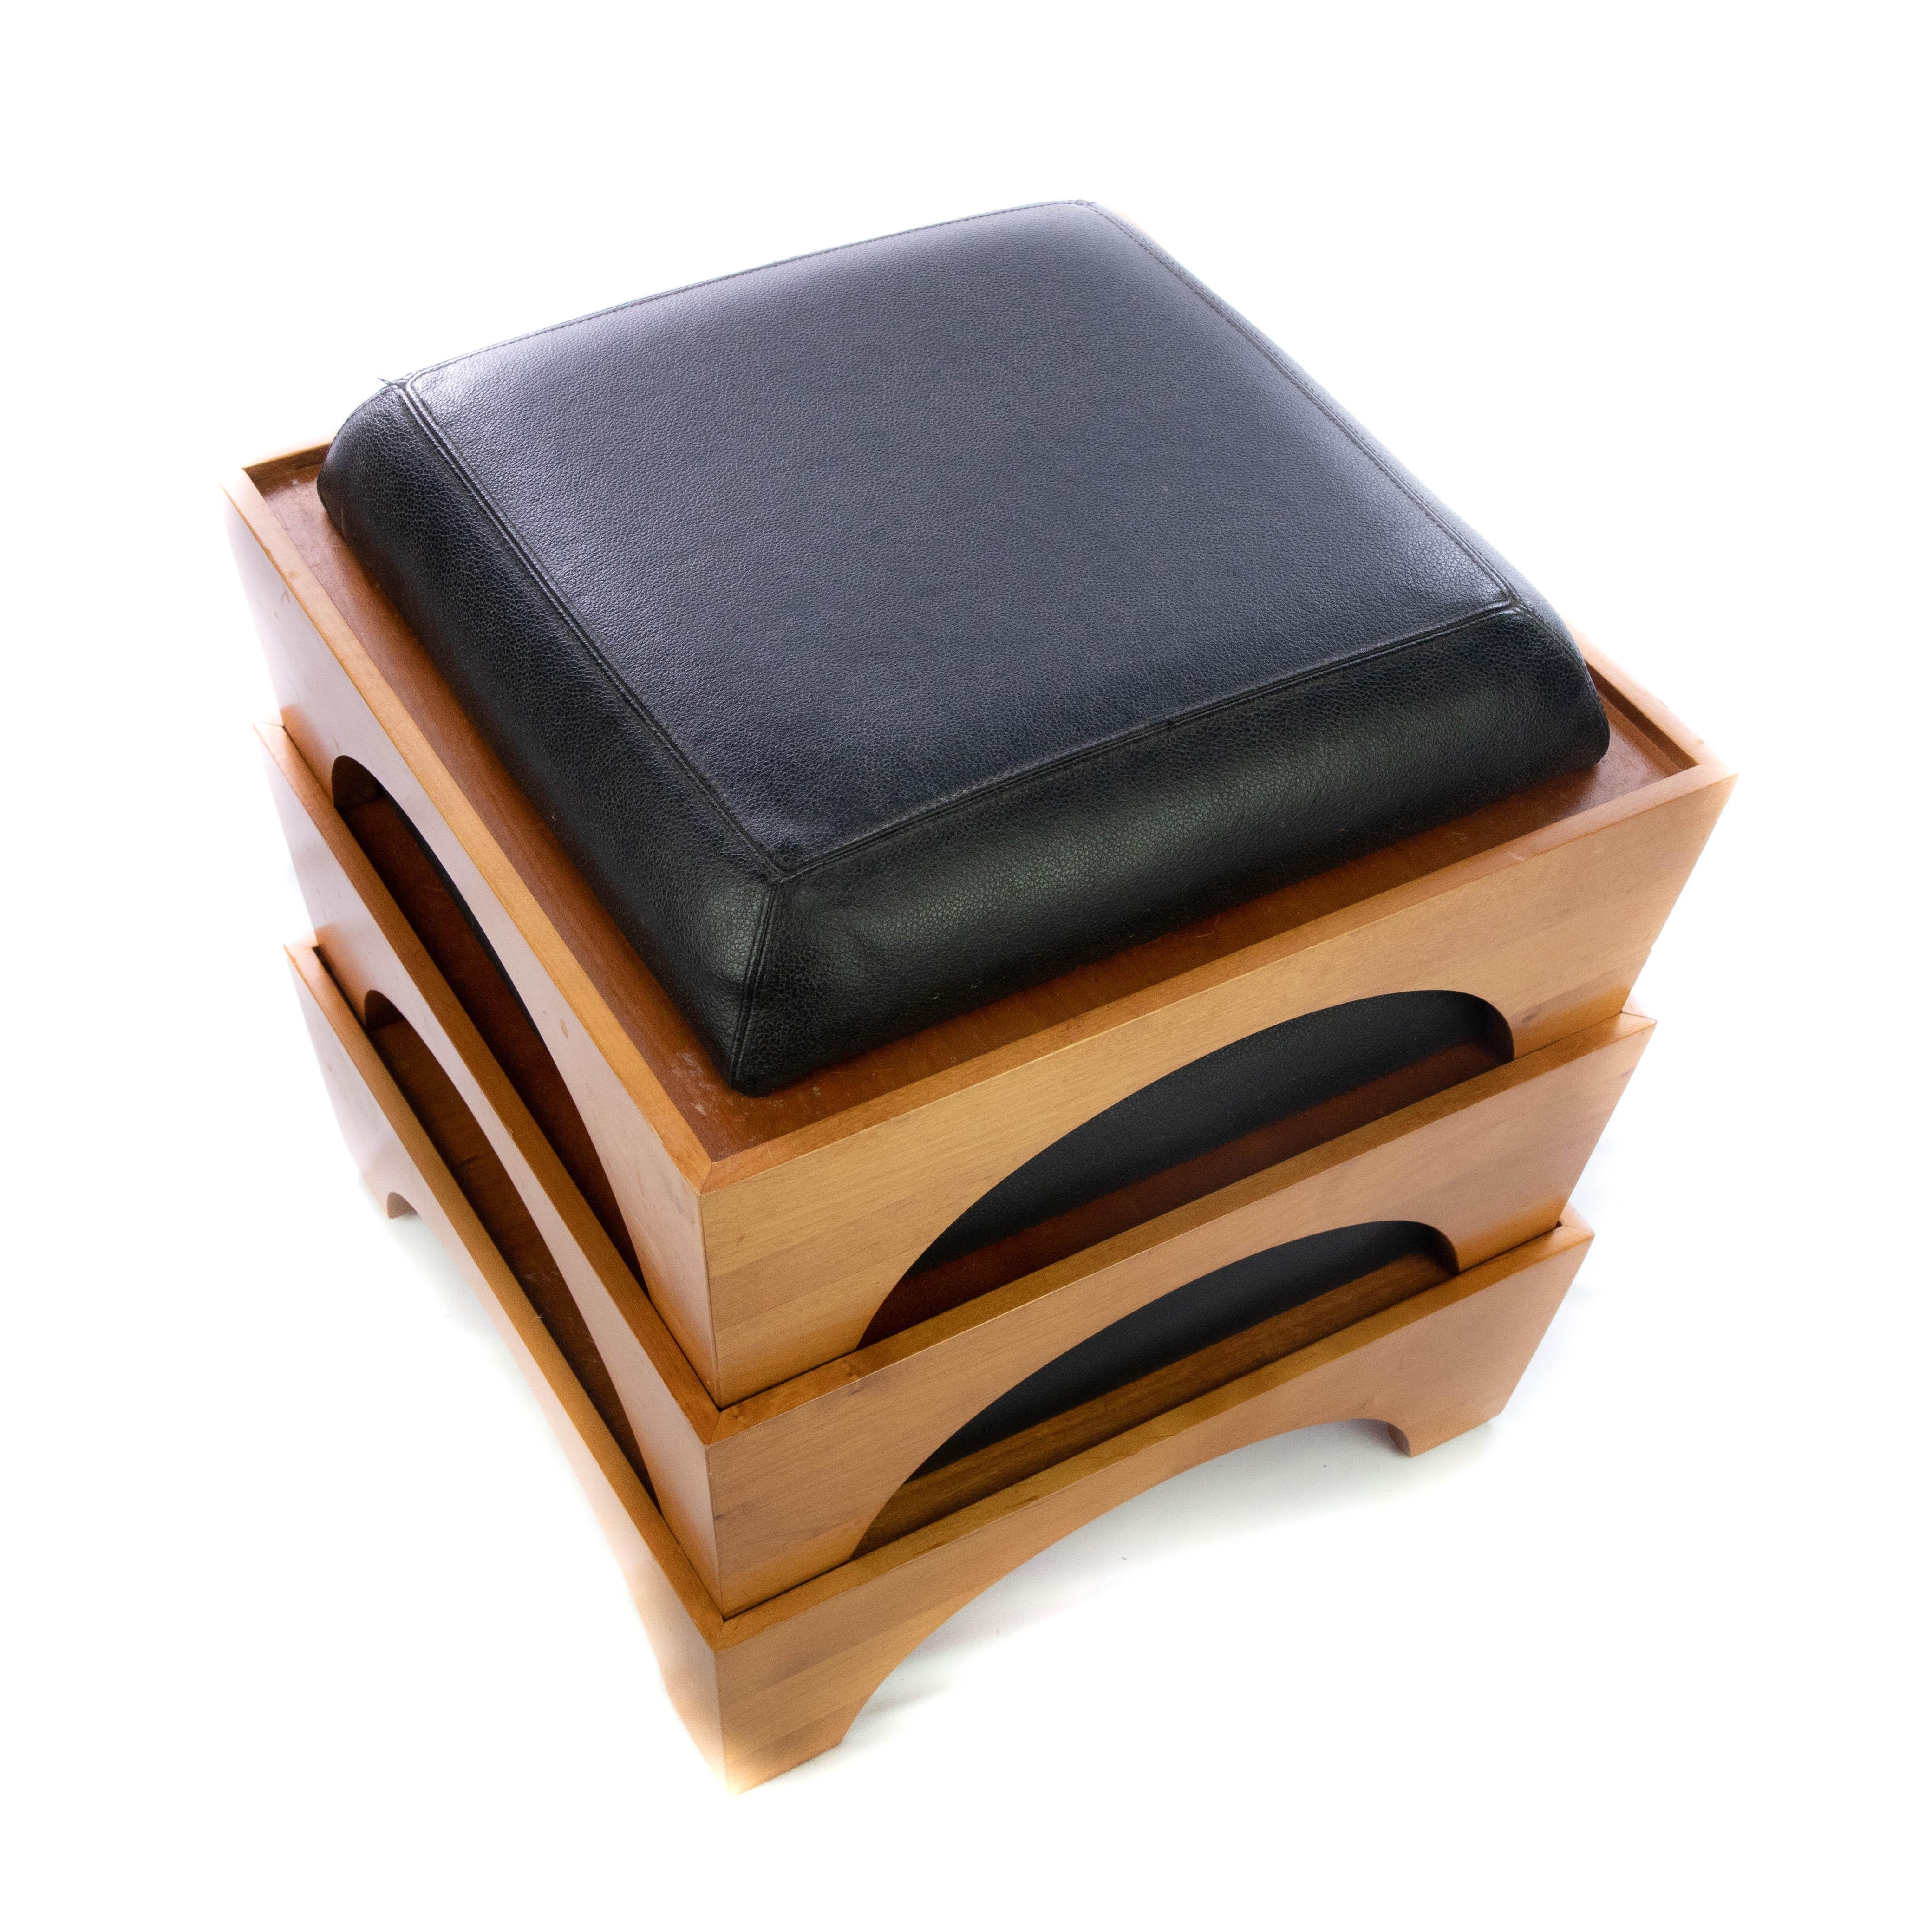 Offering these simplistic stackable foot stools made for Levenger. There are three in the set. The sides are of a light blended wood that have arches cut on each side that makes a bracketed foot. Each of them having a lip where the others can stack